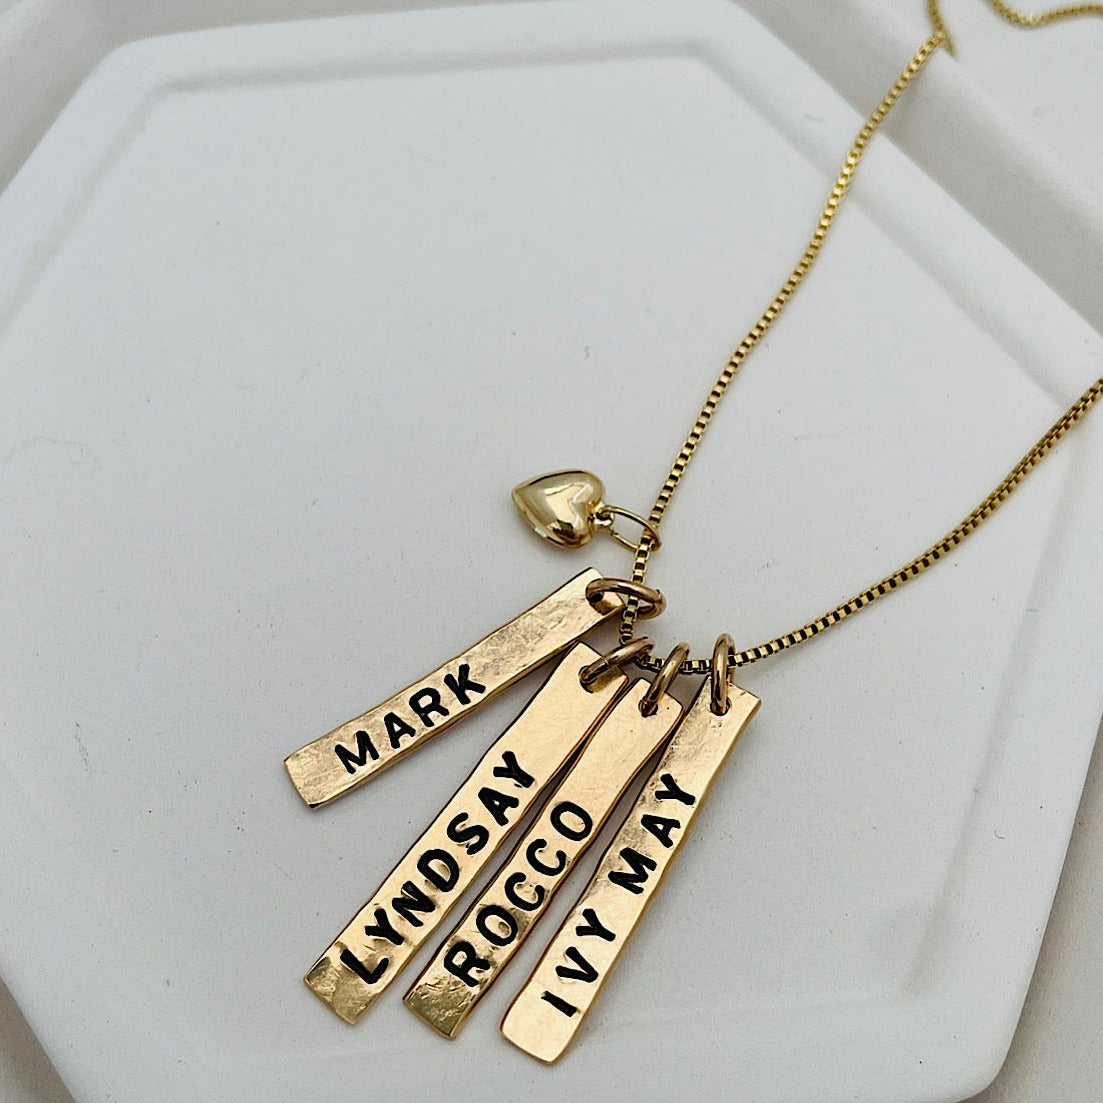 Harlow Rustic Tag Necklace